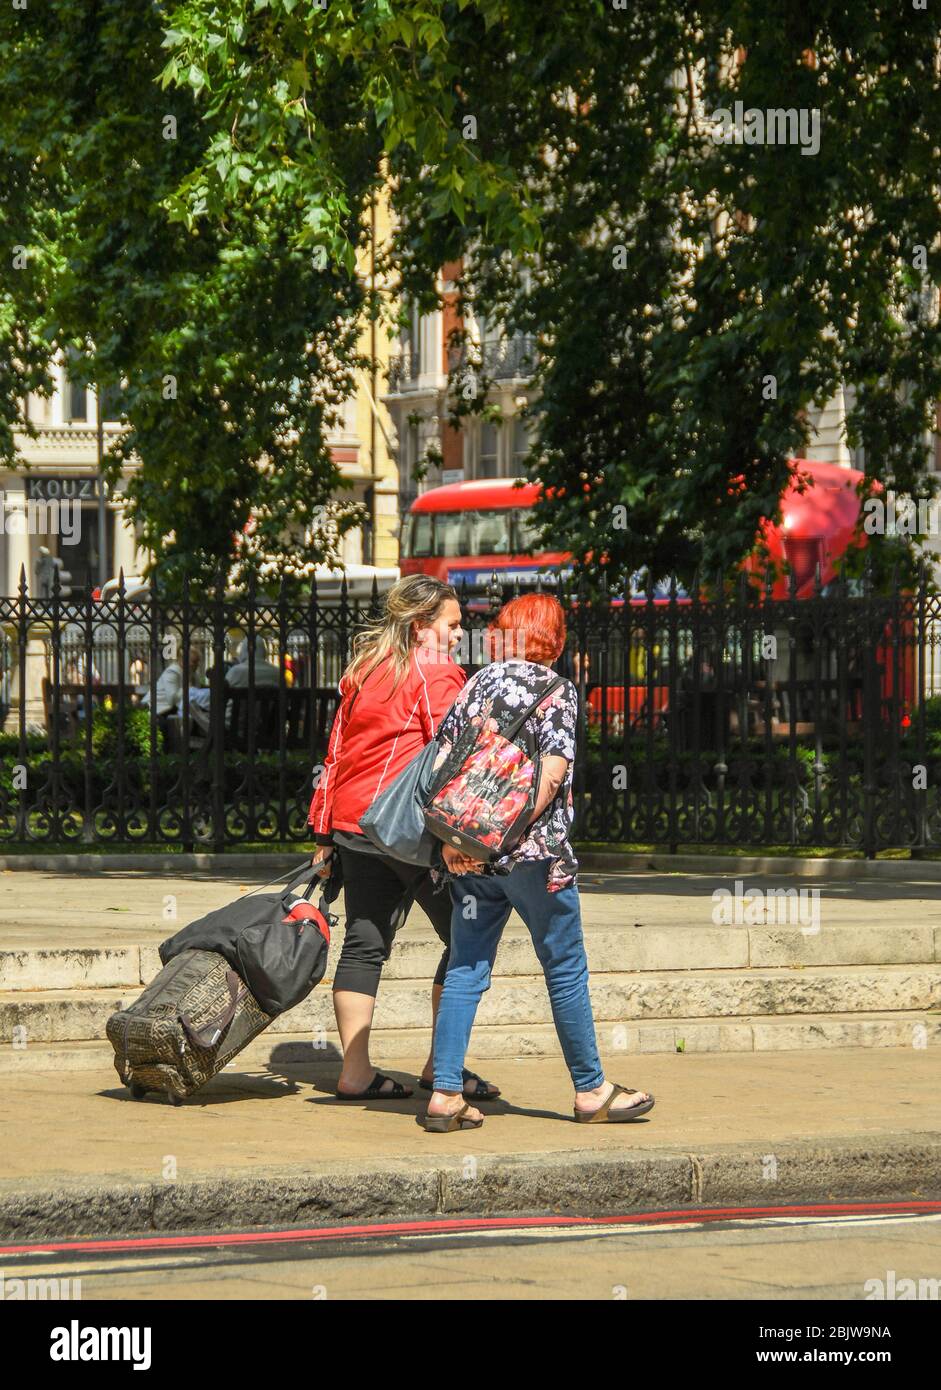 LONDON, ENGLAND - JULY 2018: Two women walking down a street in central London one of whom is pulling a suitcase Stock Photo